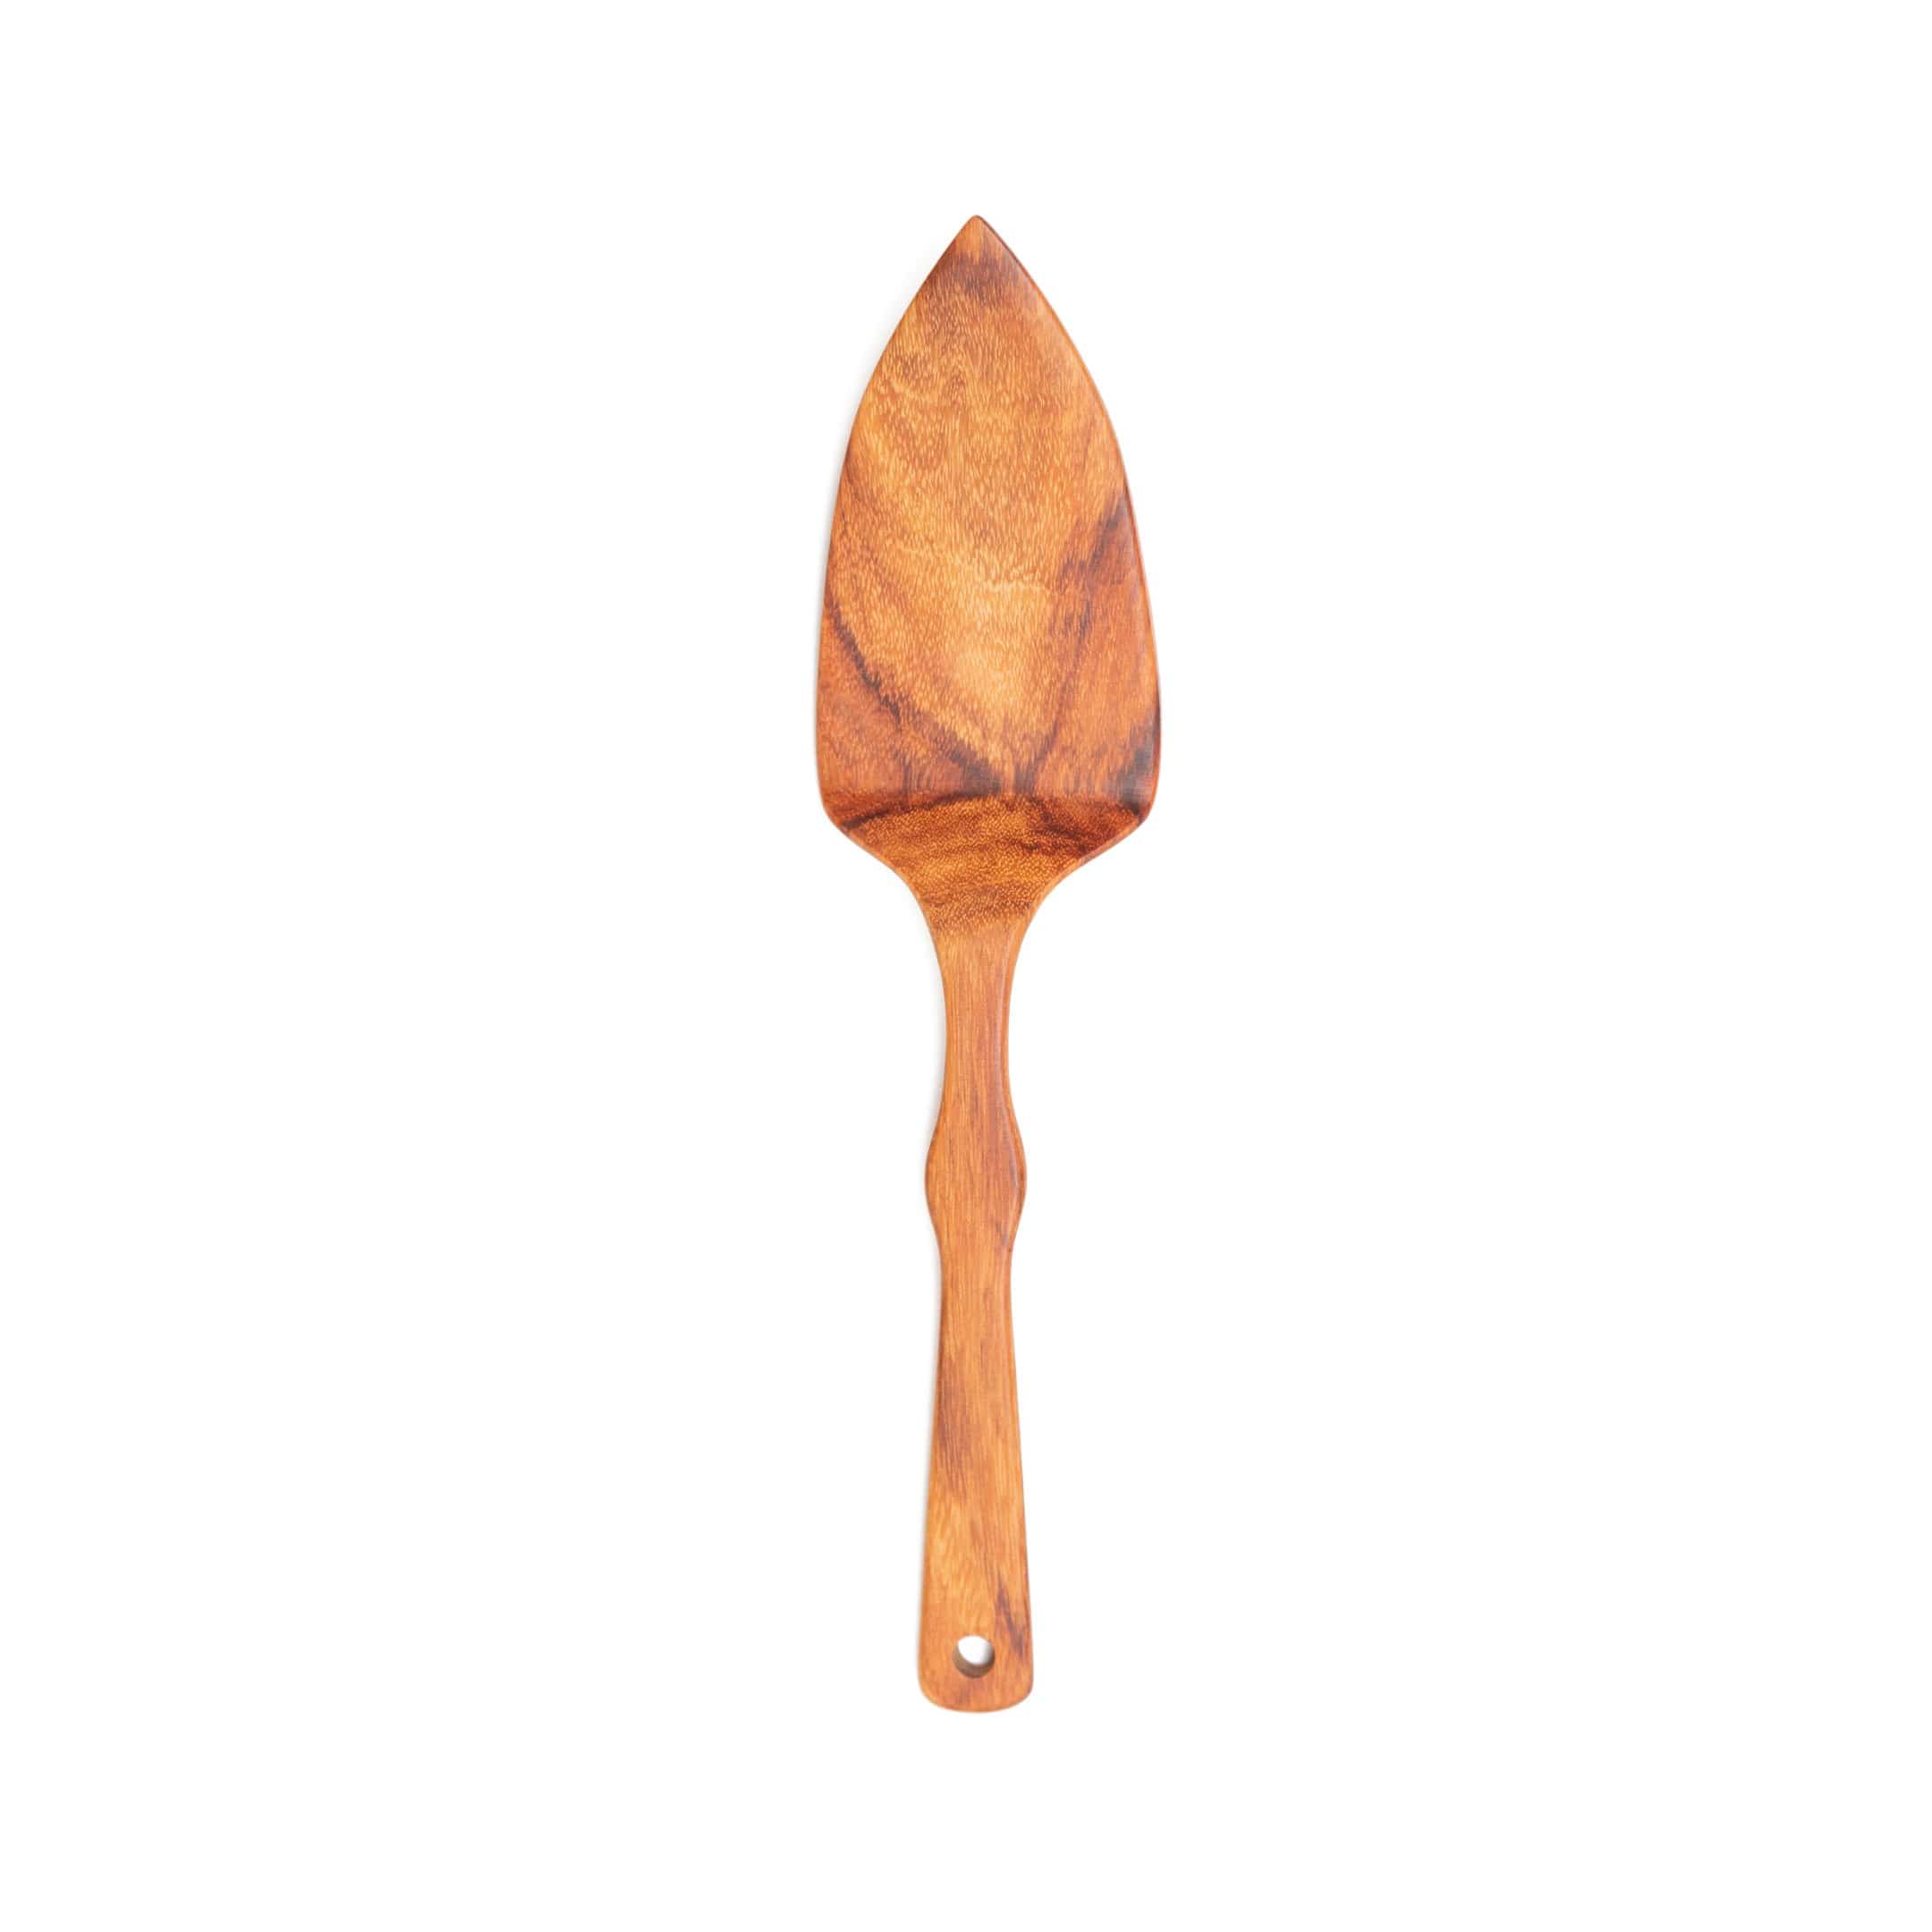 Hand-carved cake server: sustainable macawood or laurelwood, fair trade, handmade in Guatemala. Unique gift, eco-friendly kitchenware, elevate your table! ✨